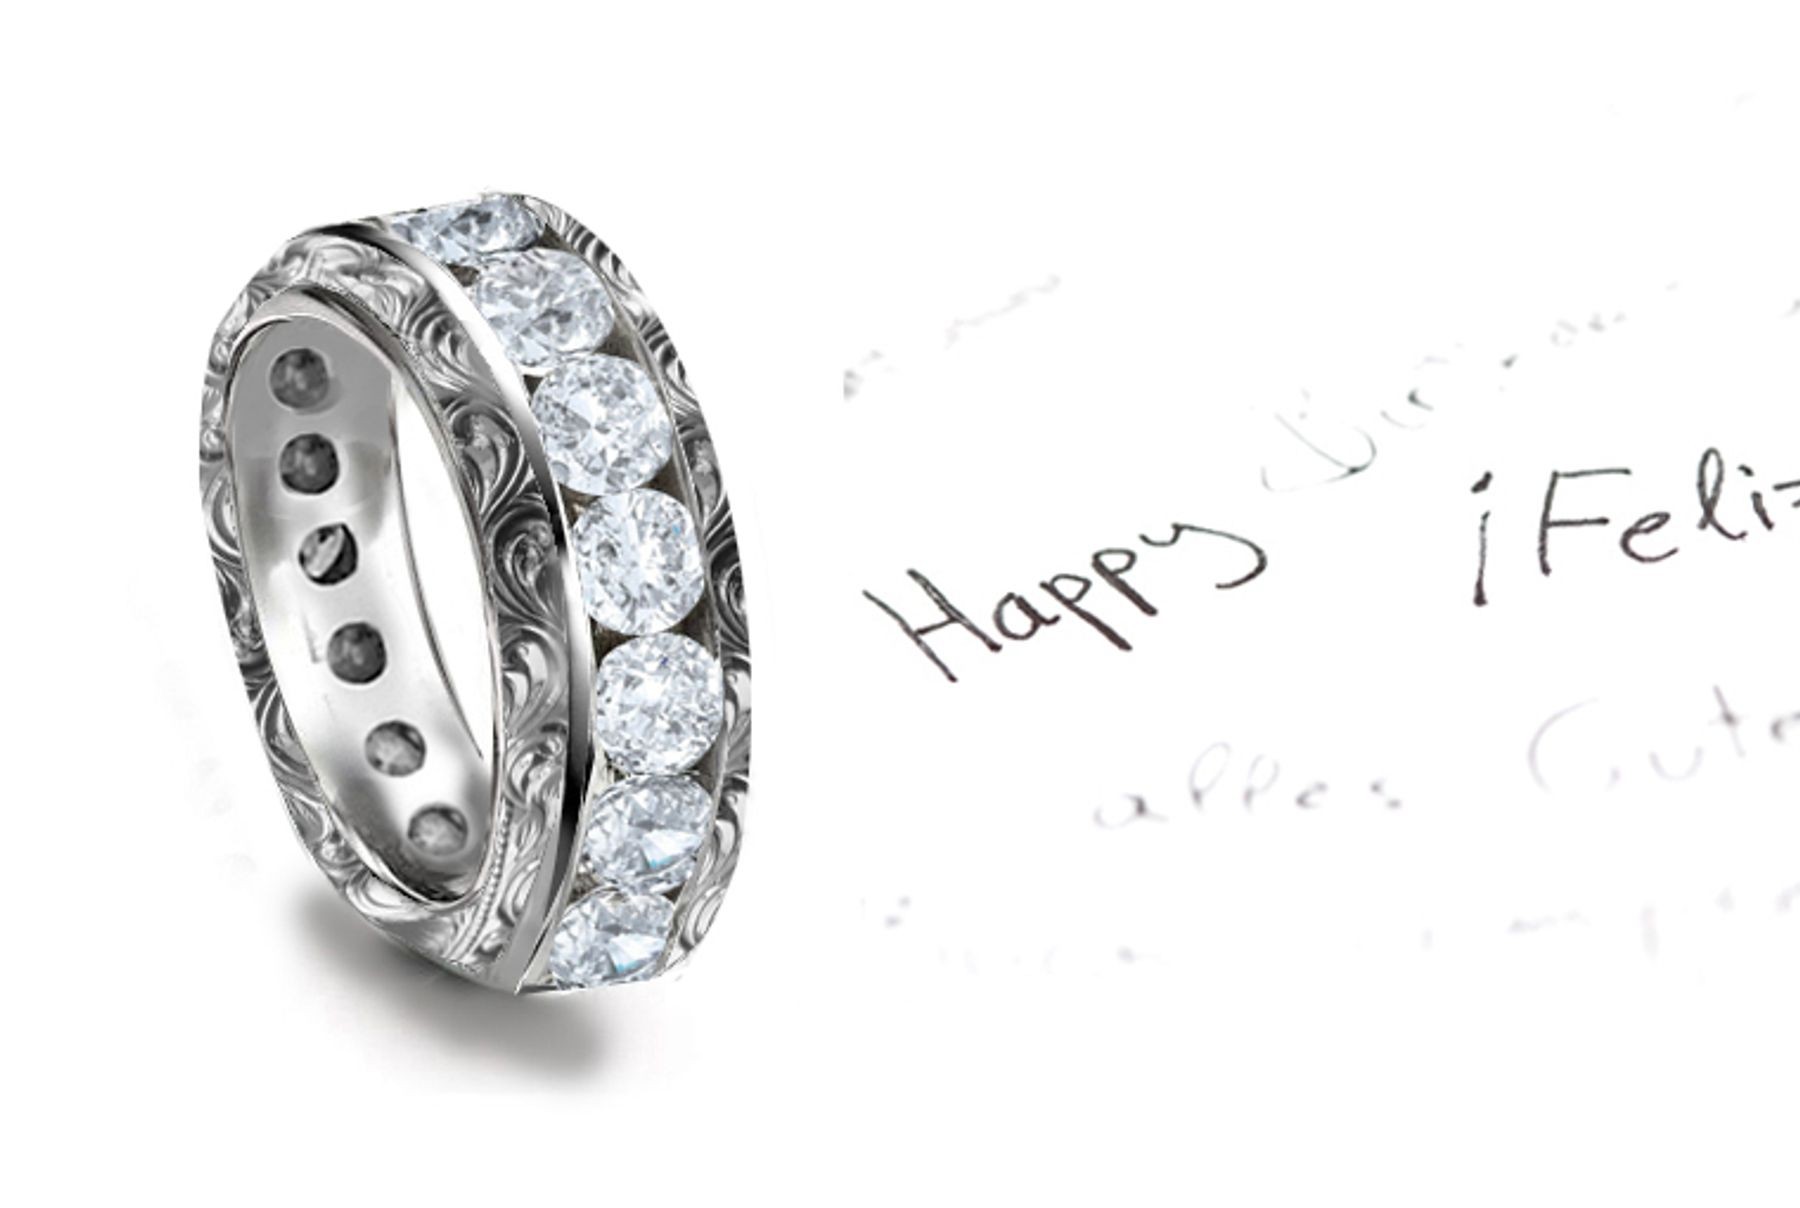 Elegant: Platinum Diamond Band with Circle of Sparkling Diamonds & Scrolling Motifs Size 6 with so much Awe